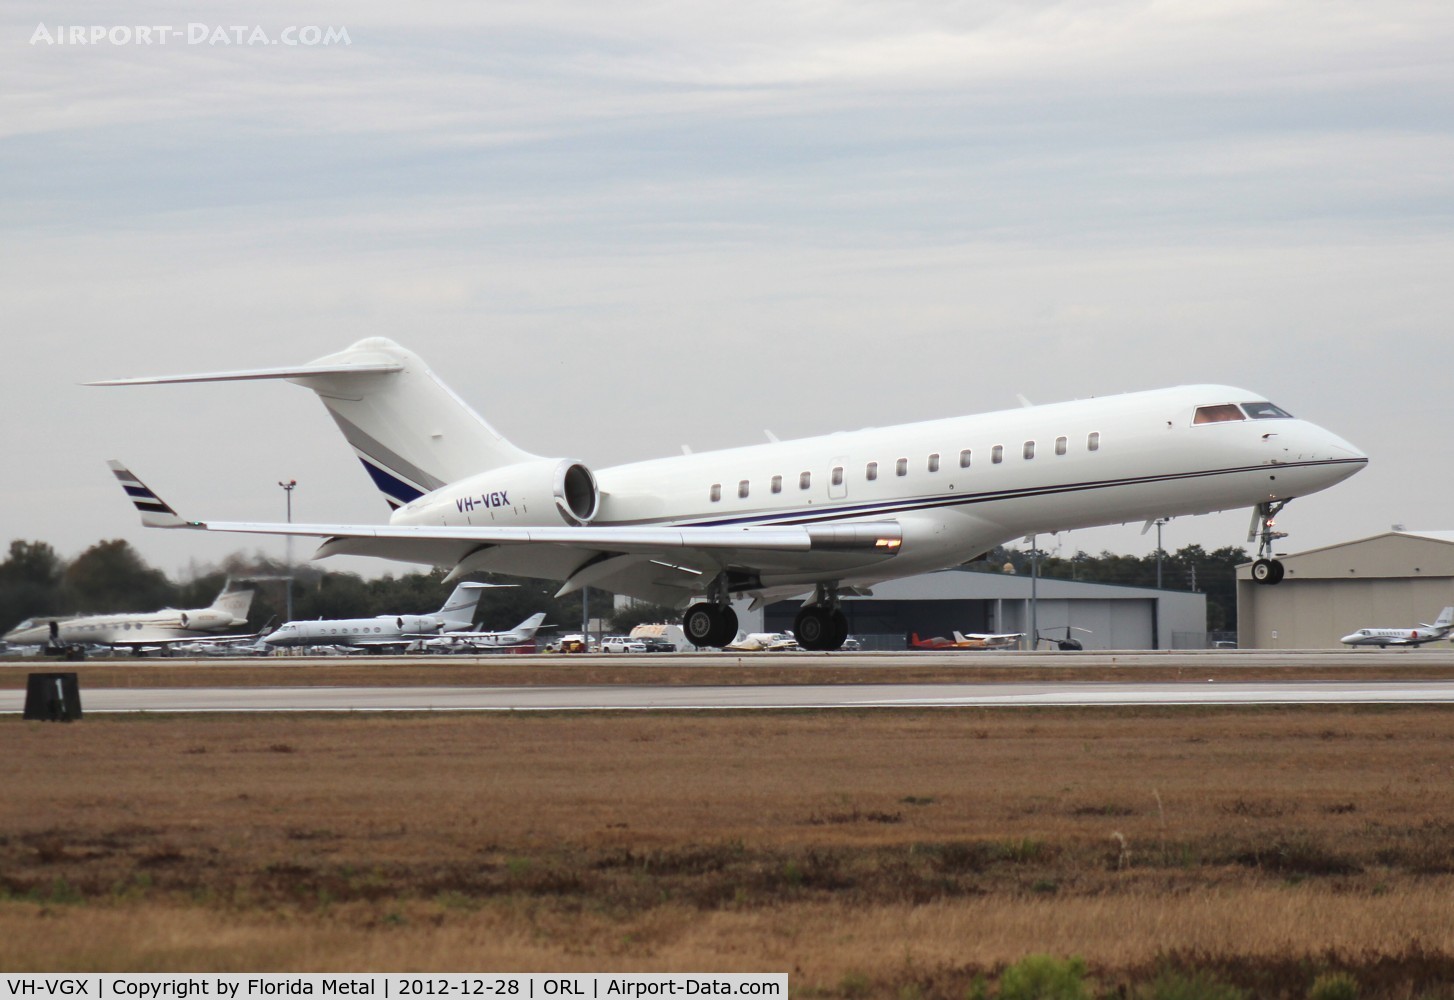 VH-VGX, 2001 Bombardier BD-700-1A10 Global Express C/N 9079, Global Express from Australia